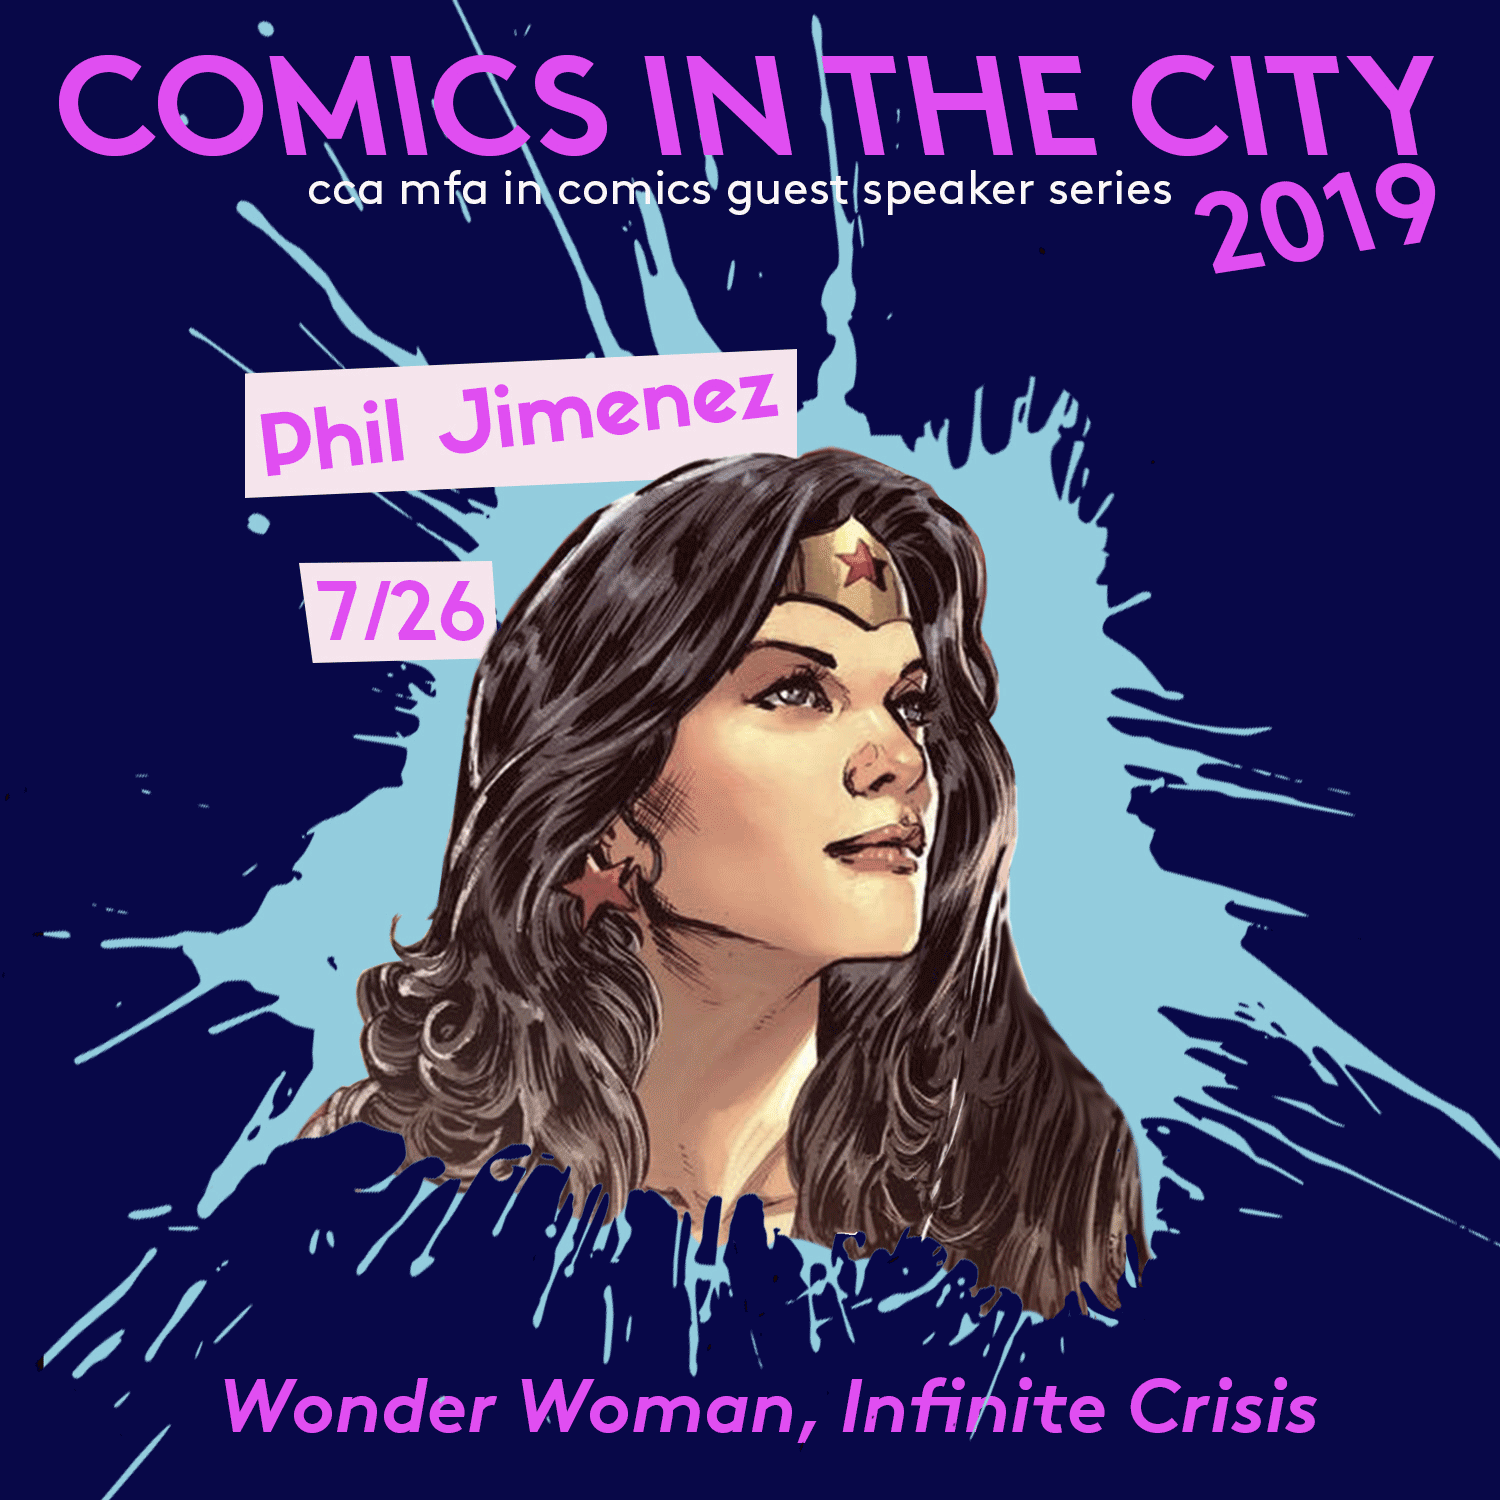 Comics in the City 2019 featuring Phil Jimenez Poster_Events_NP